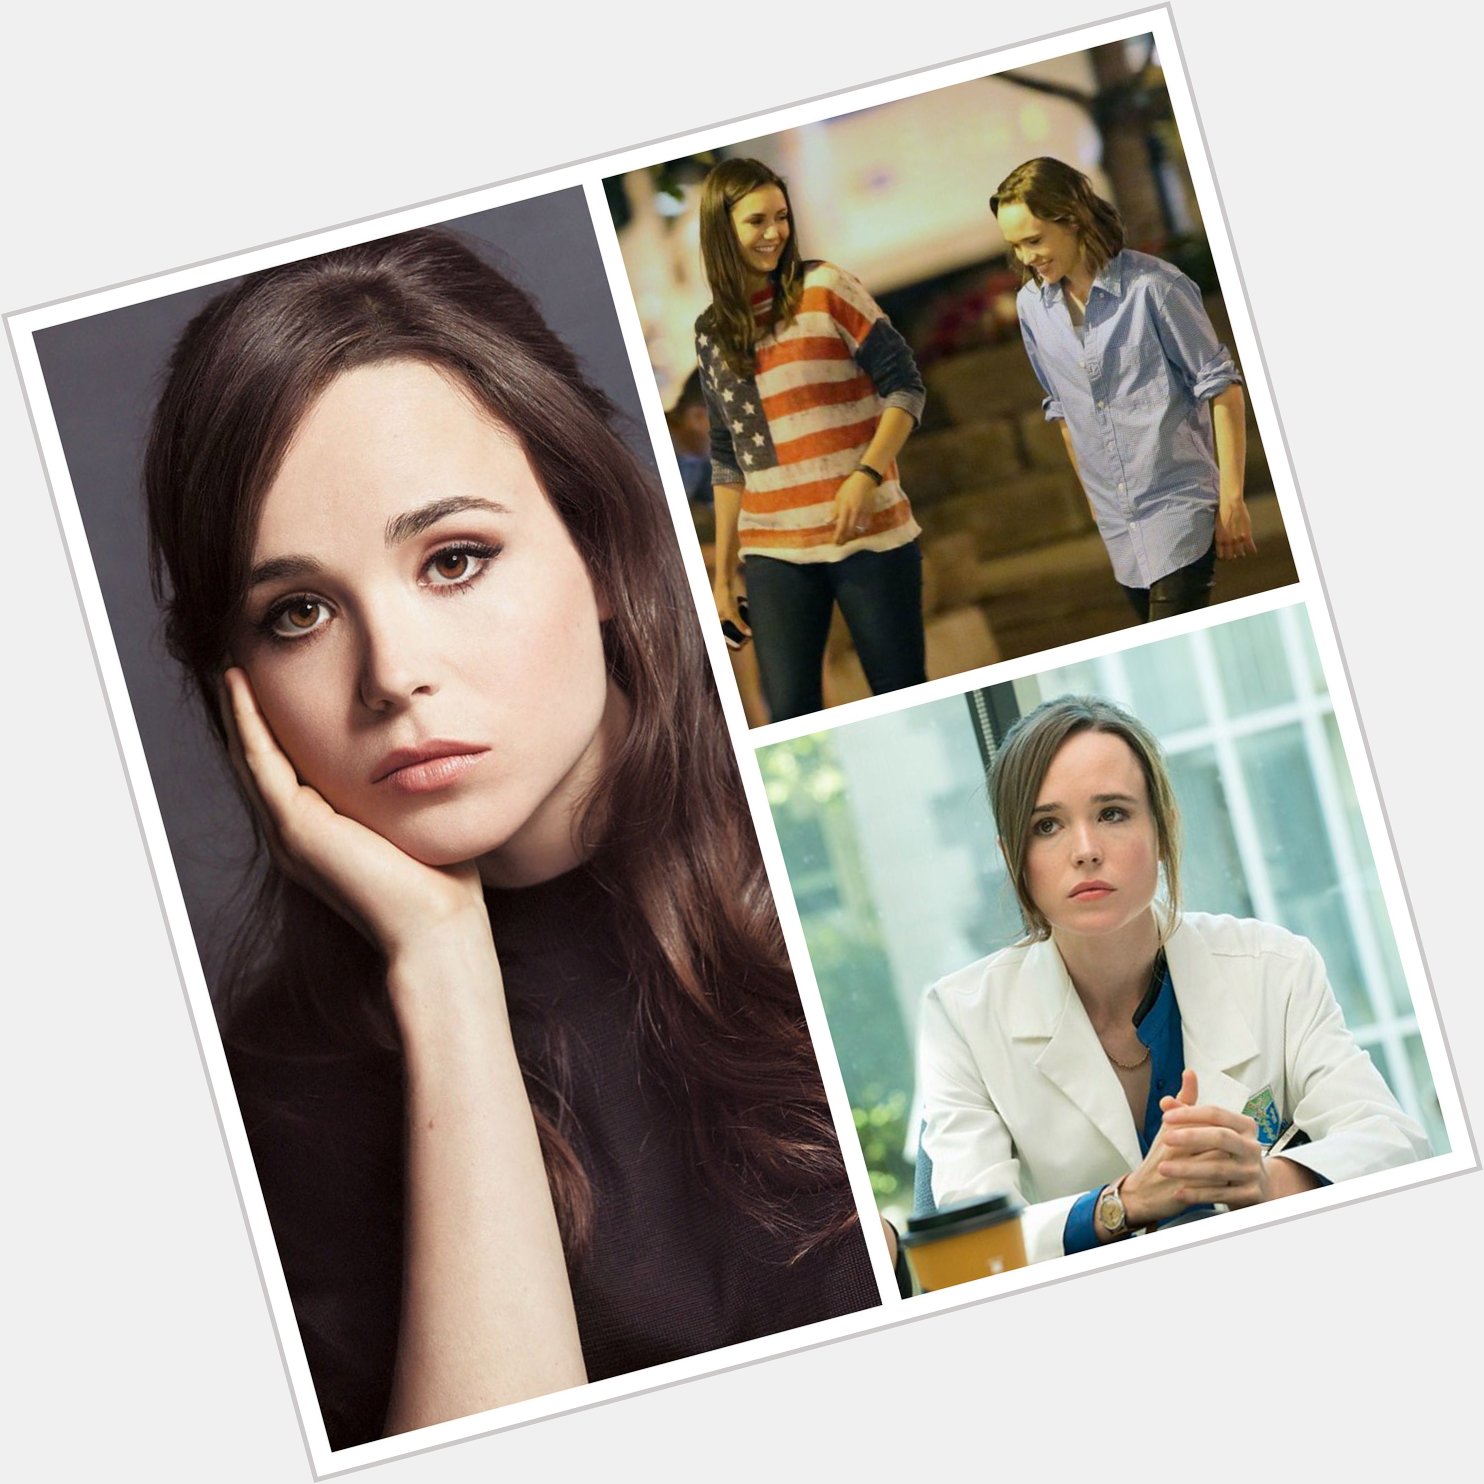 Happy Birthday to one of my fav actresses from Flatliners, Ellen Page! 